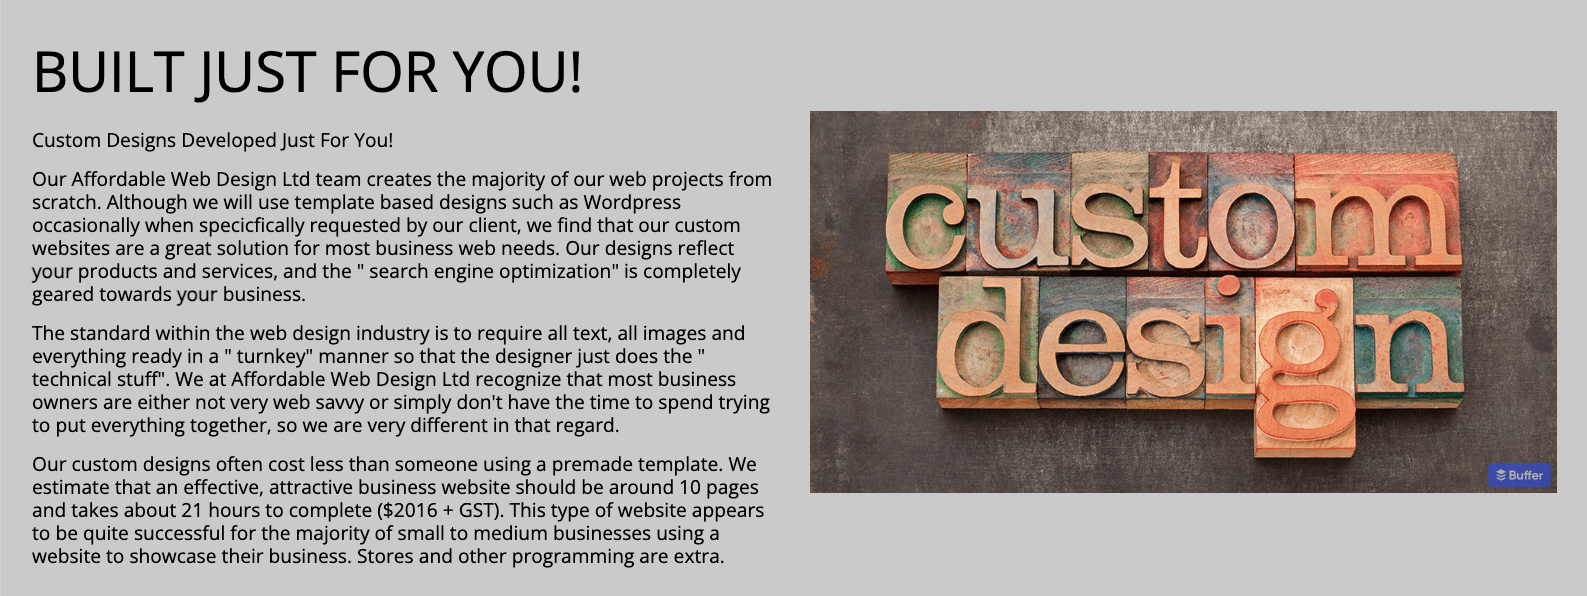 screenshot from a web design company's service page showing three long paragraphs of text next to a stock photo of the words "custom design" 